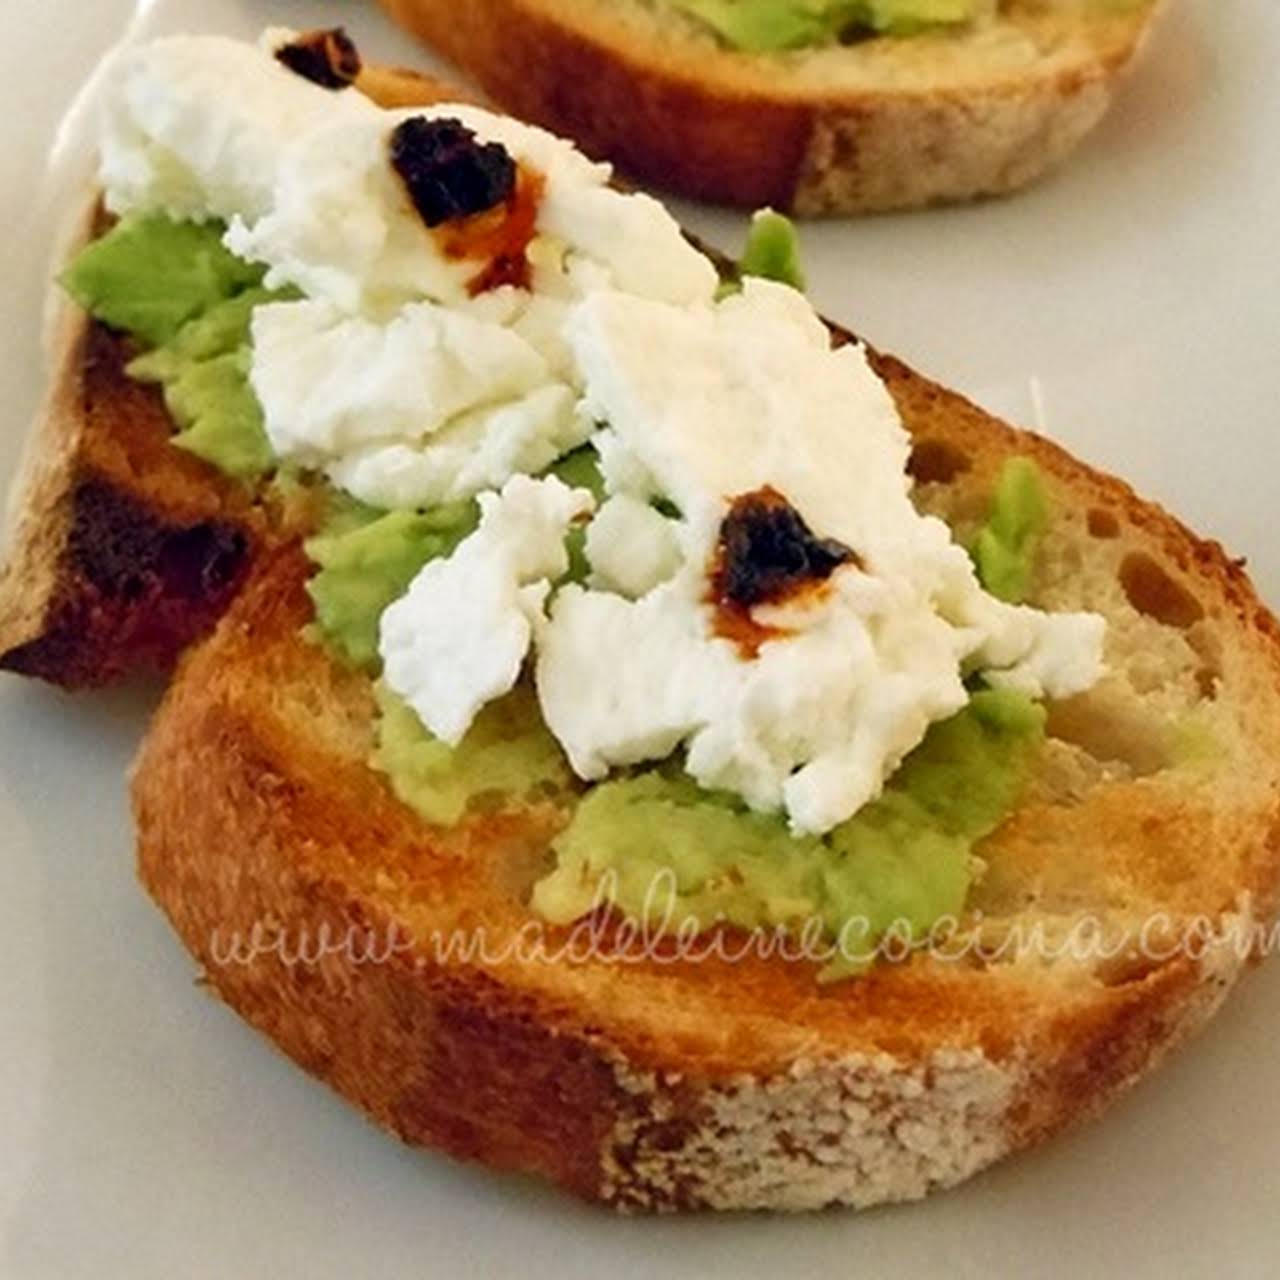 Avocado and Goat Cheese  in this area Toasted Bread